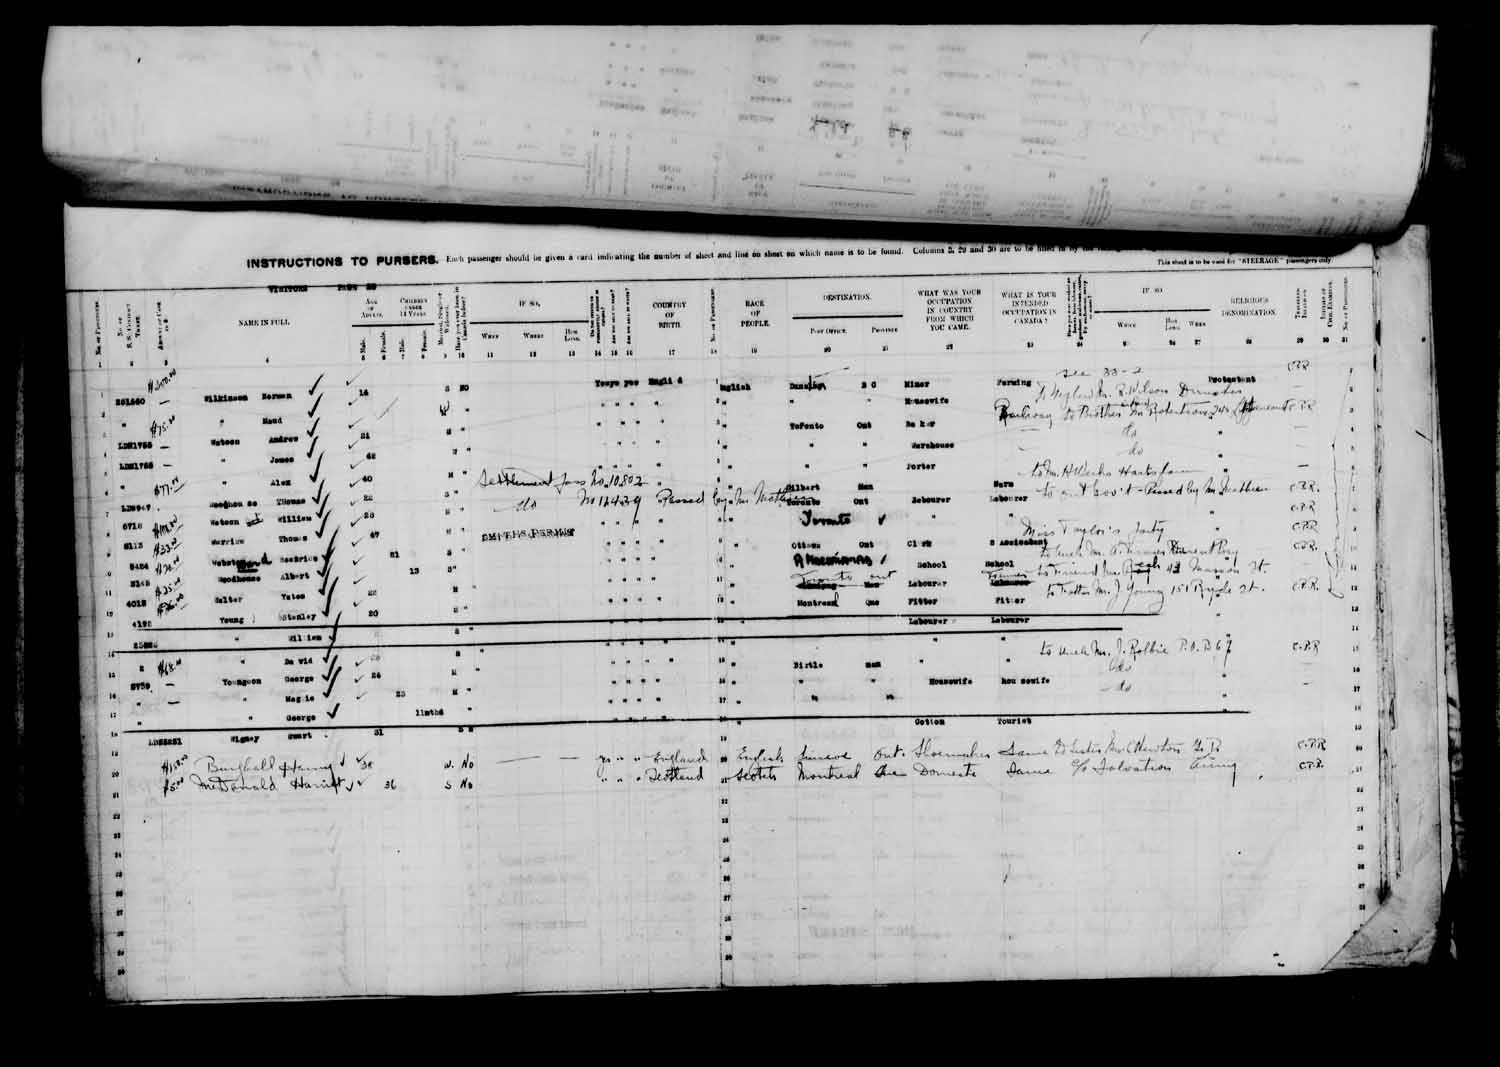 Digitized page of Passenger Lists for Image No.: e003610665